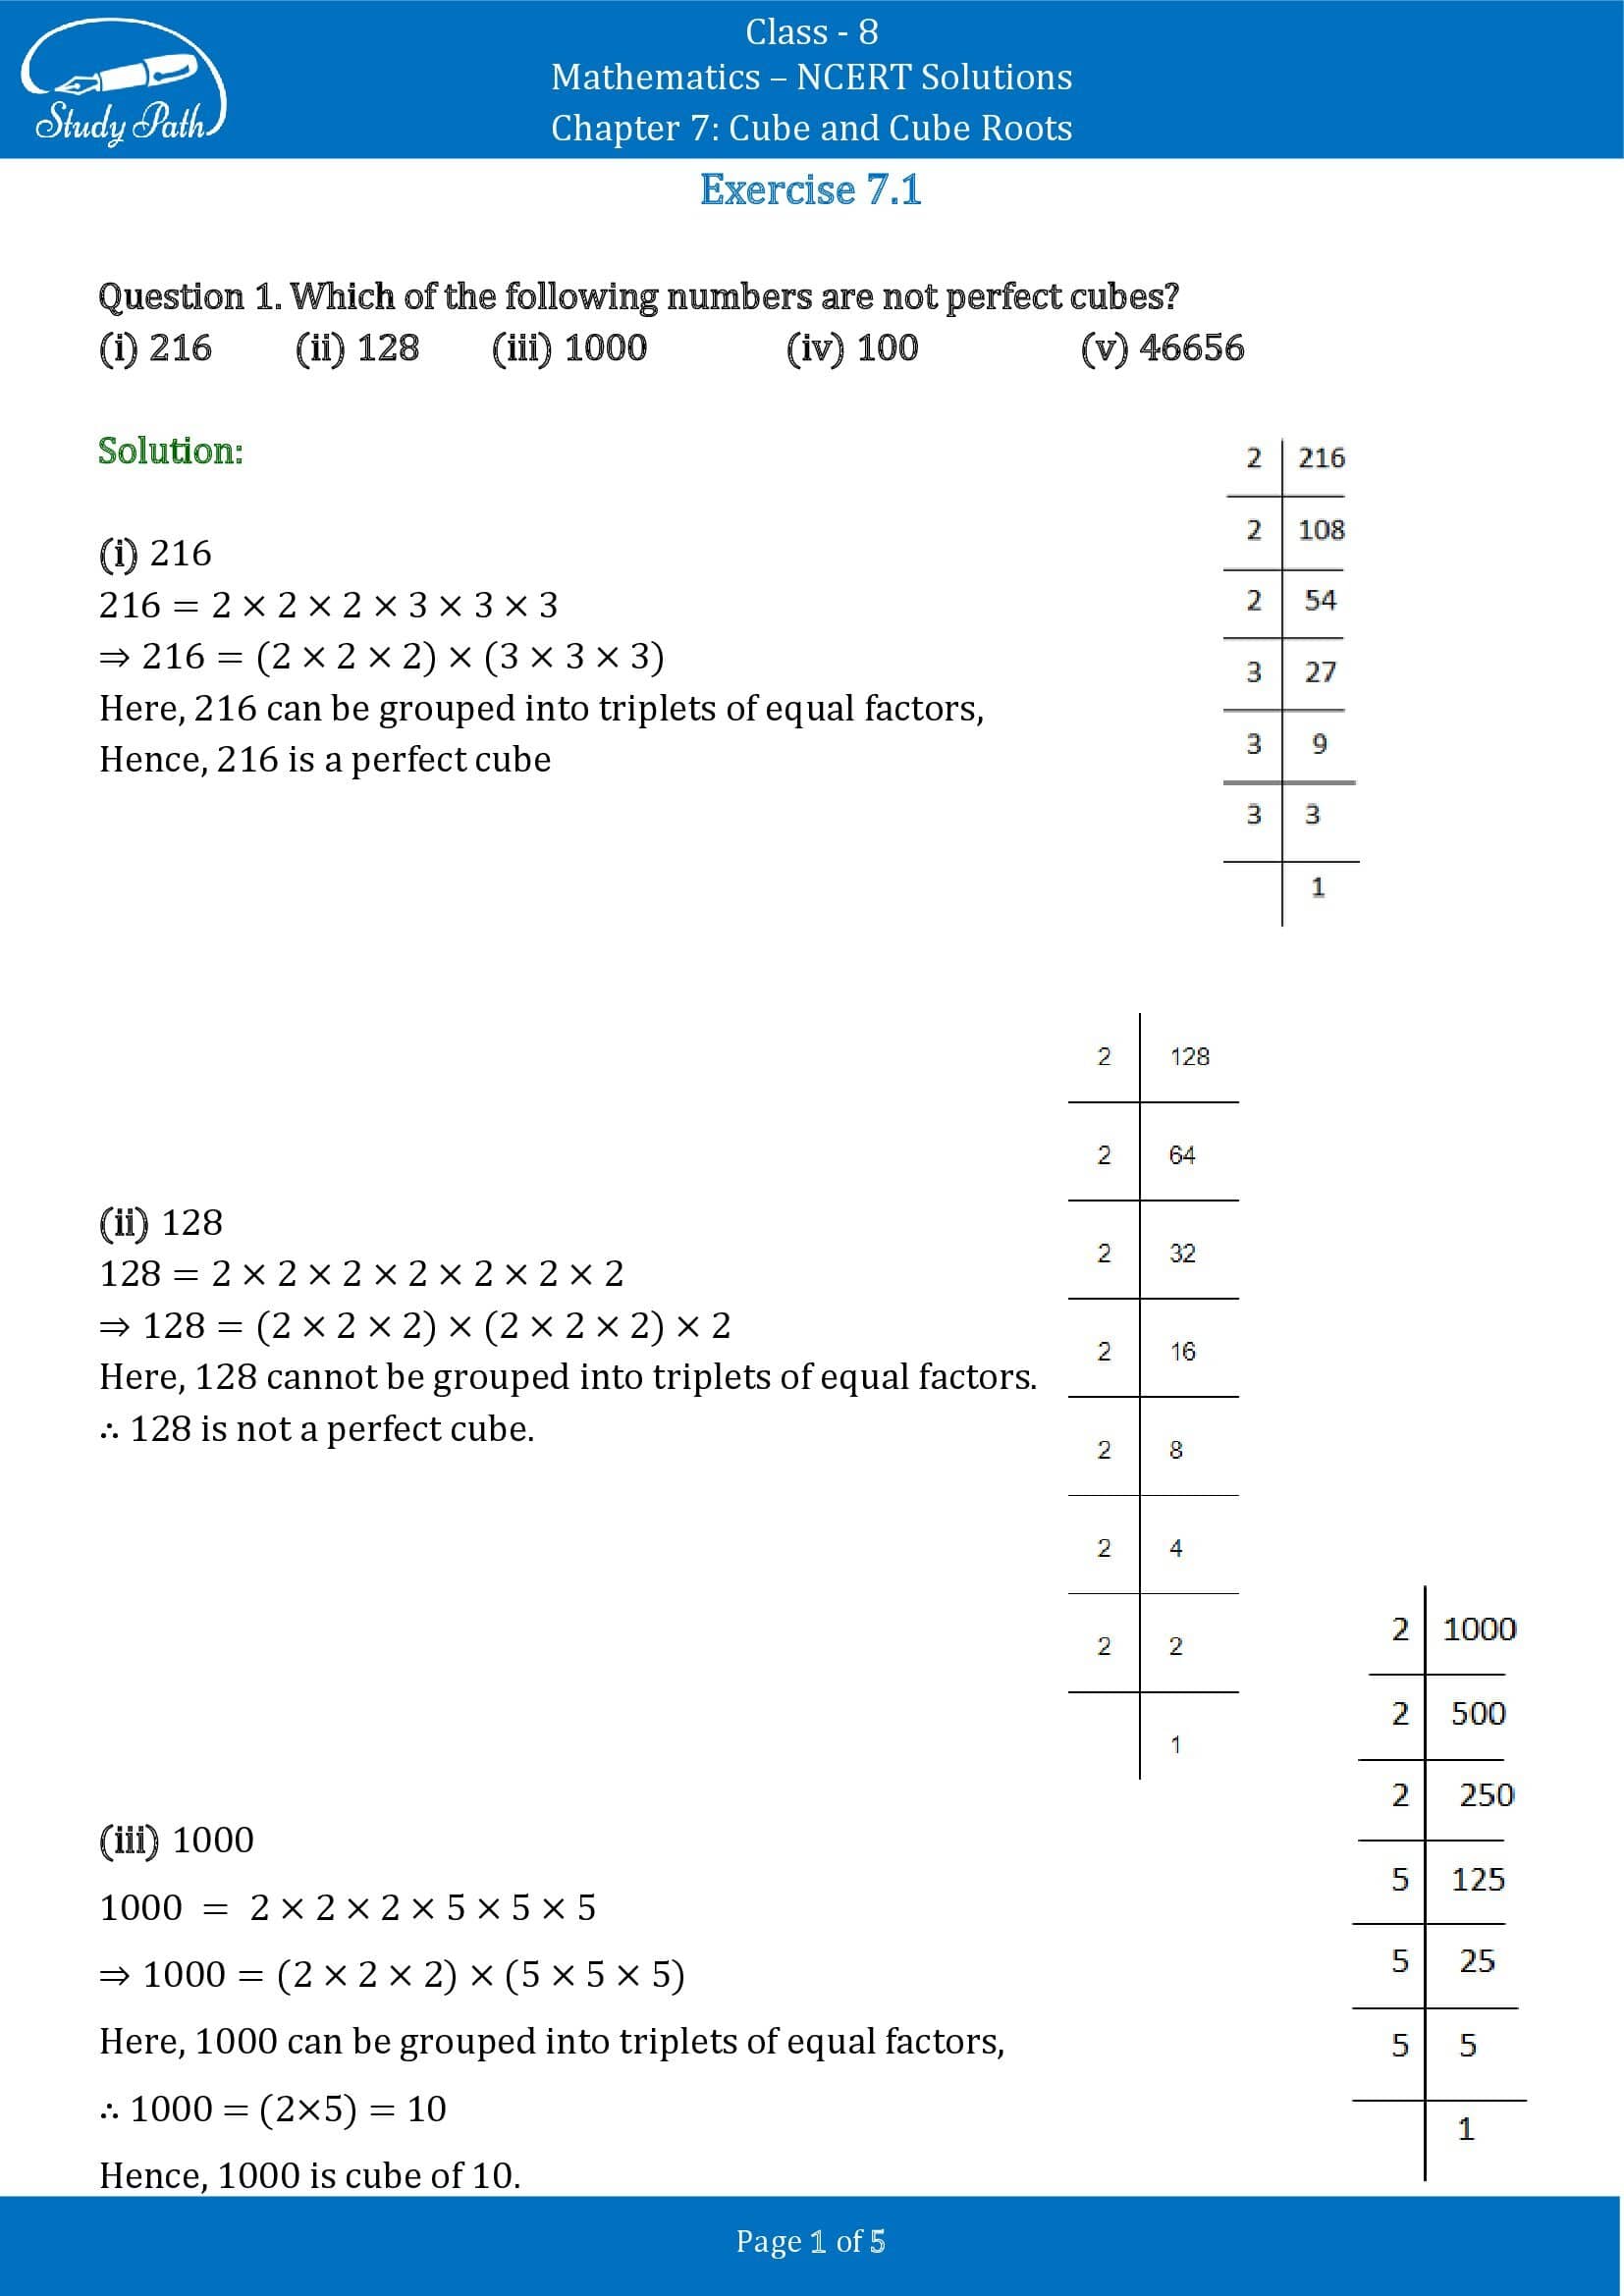 NCERT Solutions for Class 8 Maths Chapter 7 Cube and Cube Roots Exercise 7.1 00001